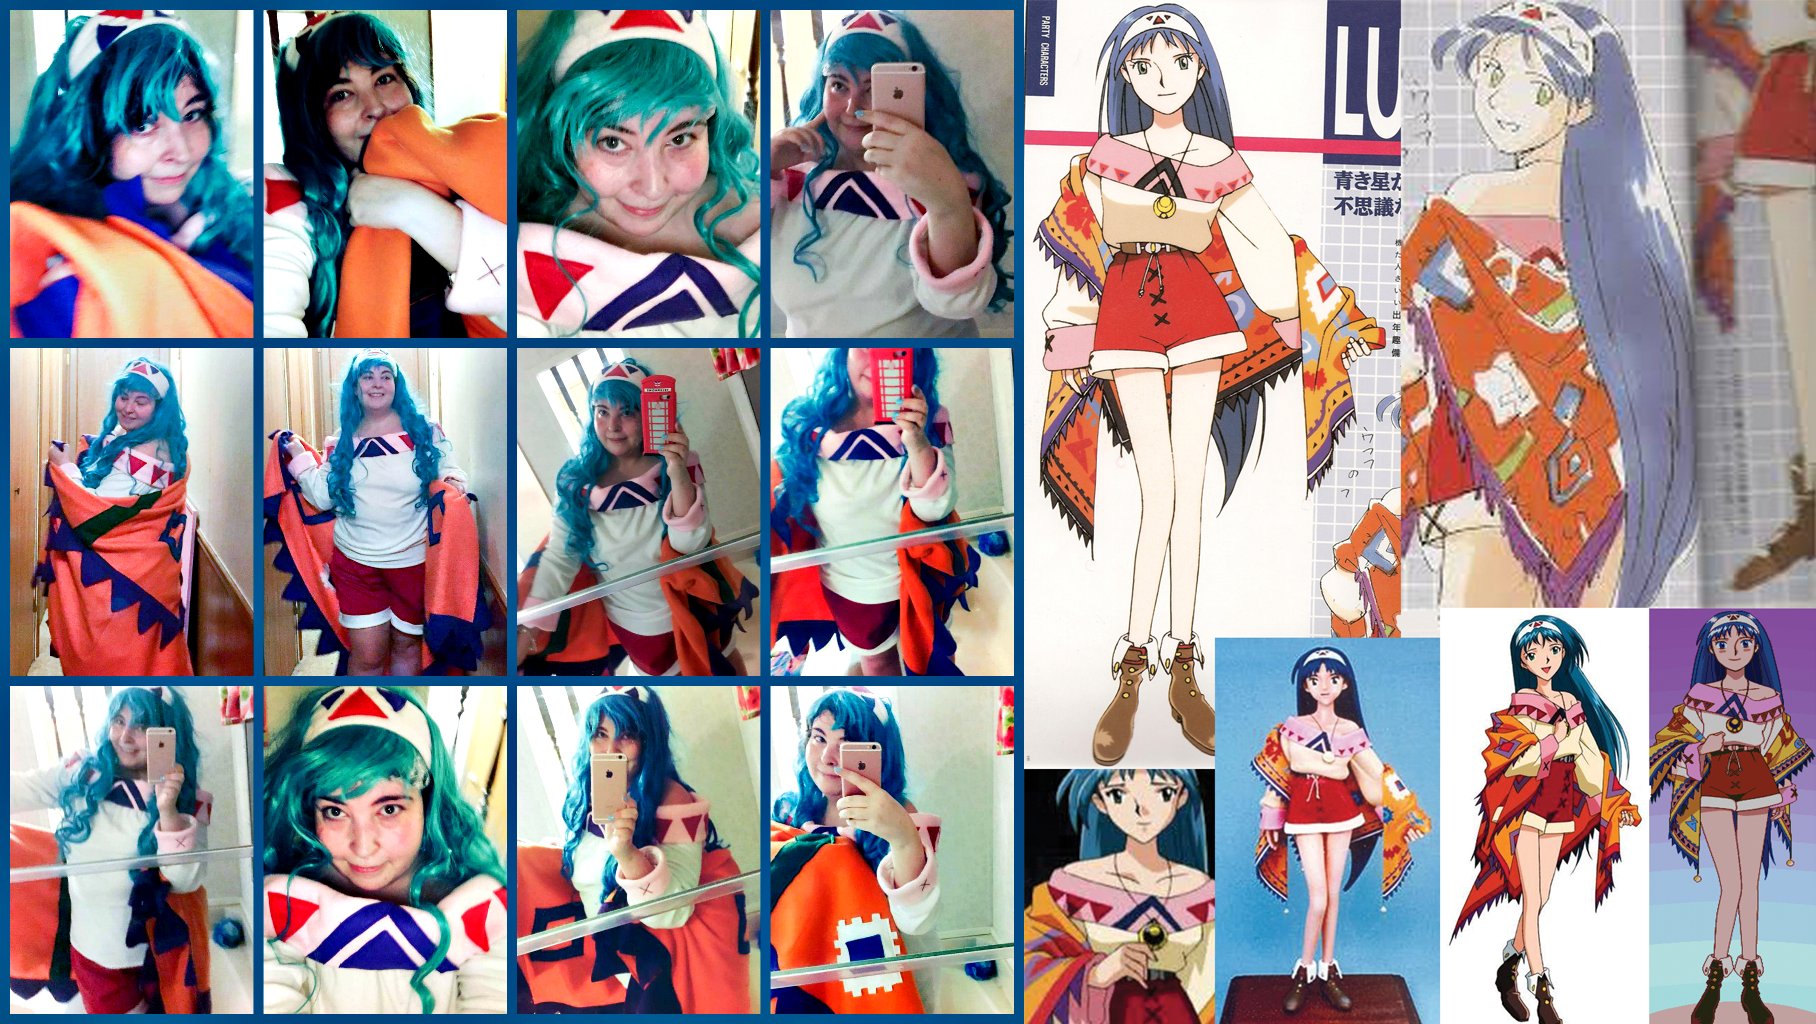 My Lucia From Lunar Eternal Blue Cosplay Costume